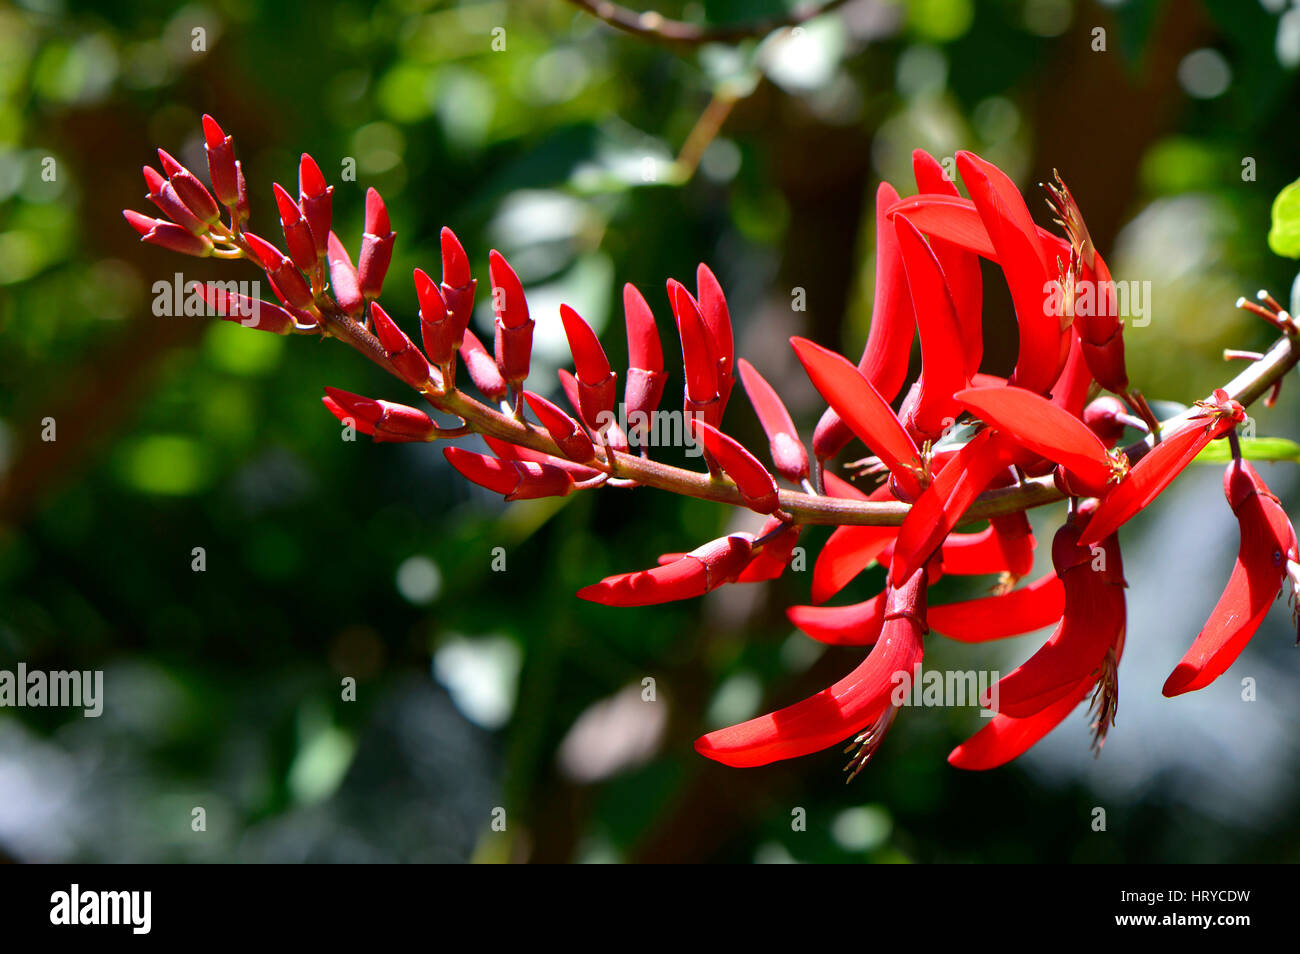 Erythrina bidwillii close up view of the flowers Stock Photo